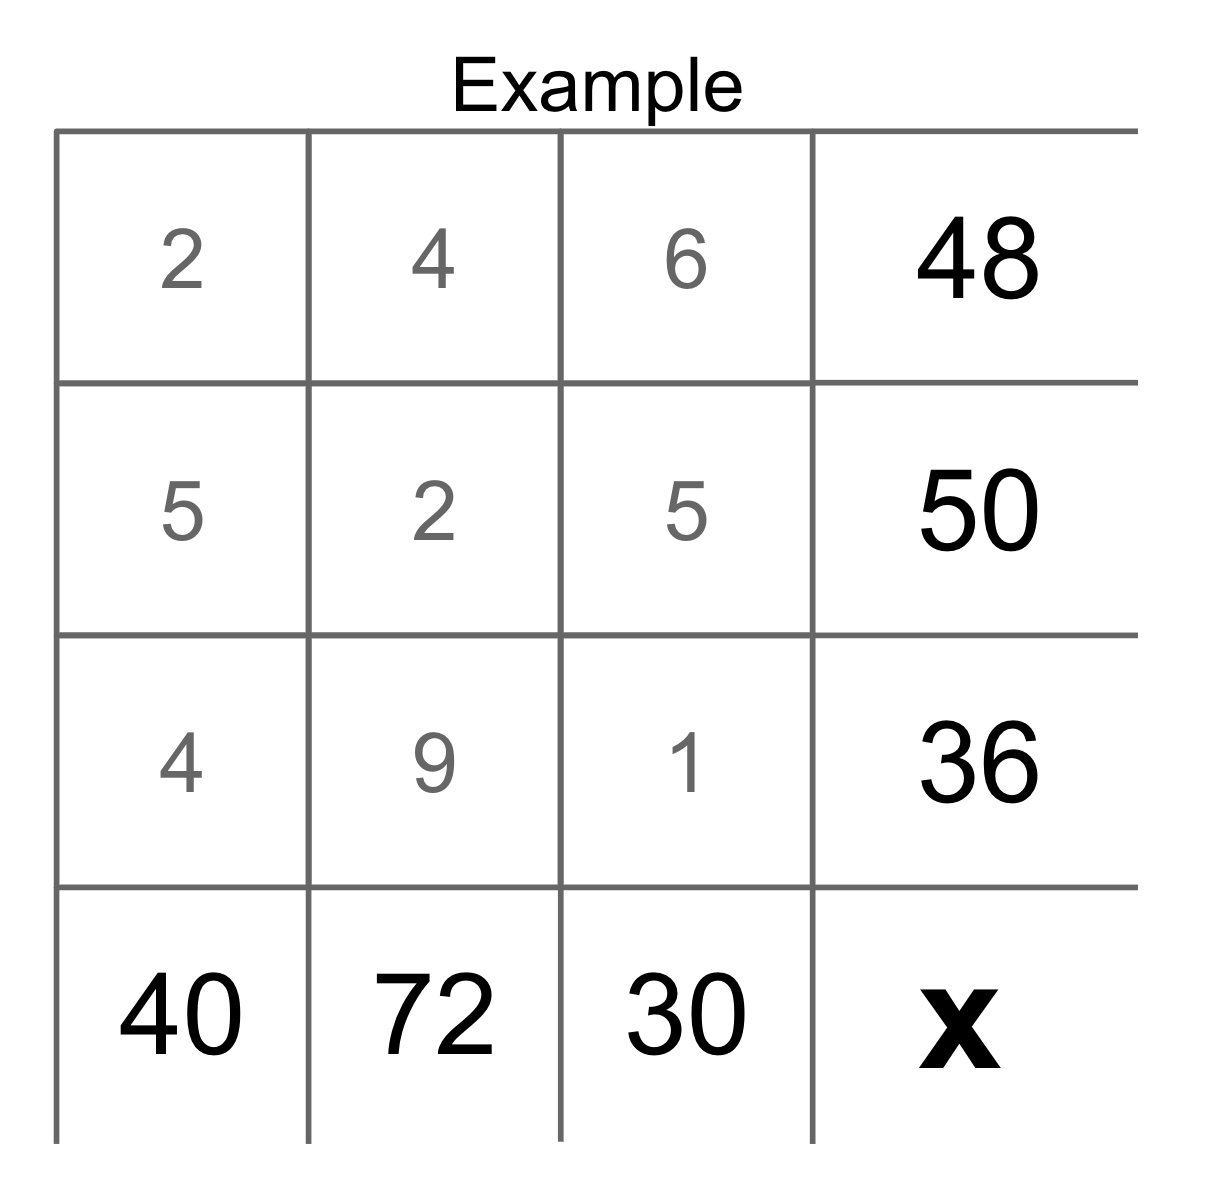 An example solution of a three-by-three yohaku puzzle where numbers need to multiply down to the products 40, 72, and 30 (at the bottom), as well as across to the products 48, 50, and 36 (down the right side.) From left to right, the solved digits are 2, 4, 6 (top row), 5, 2, 5 (middle row), and 4, 9, 1 (bottom row).